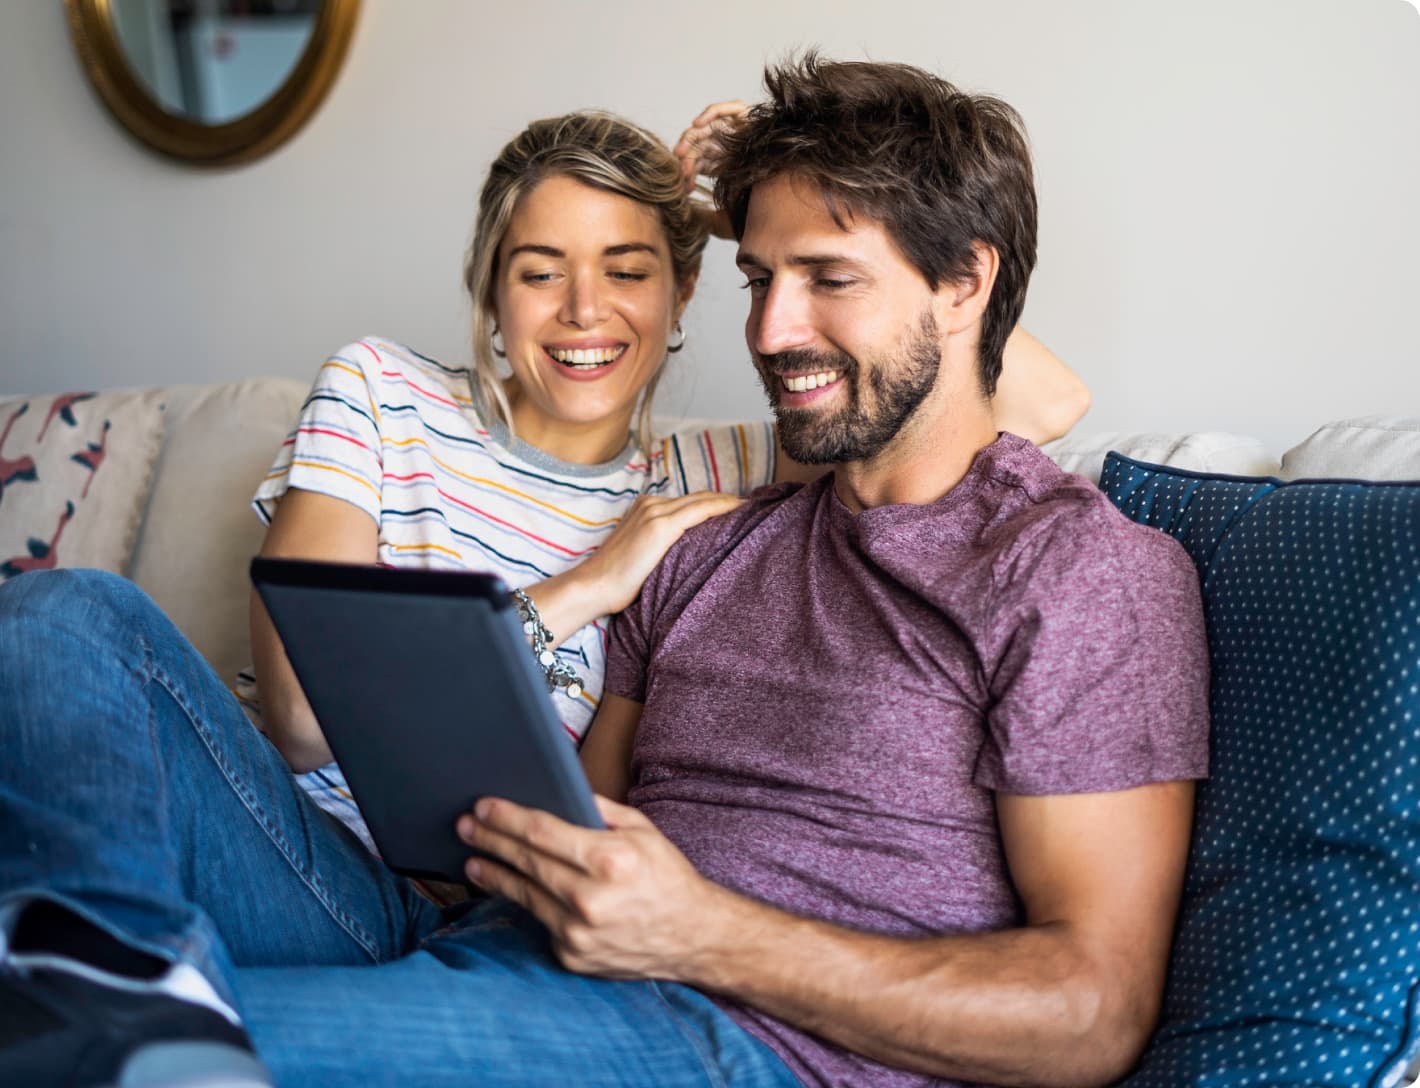 Man and woman on couch smiling and looking at an iPad